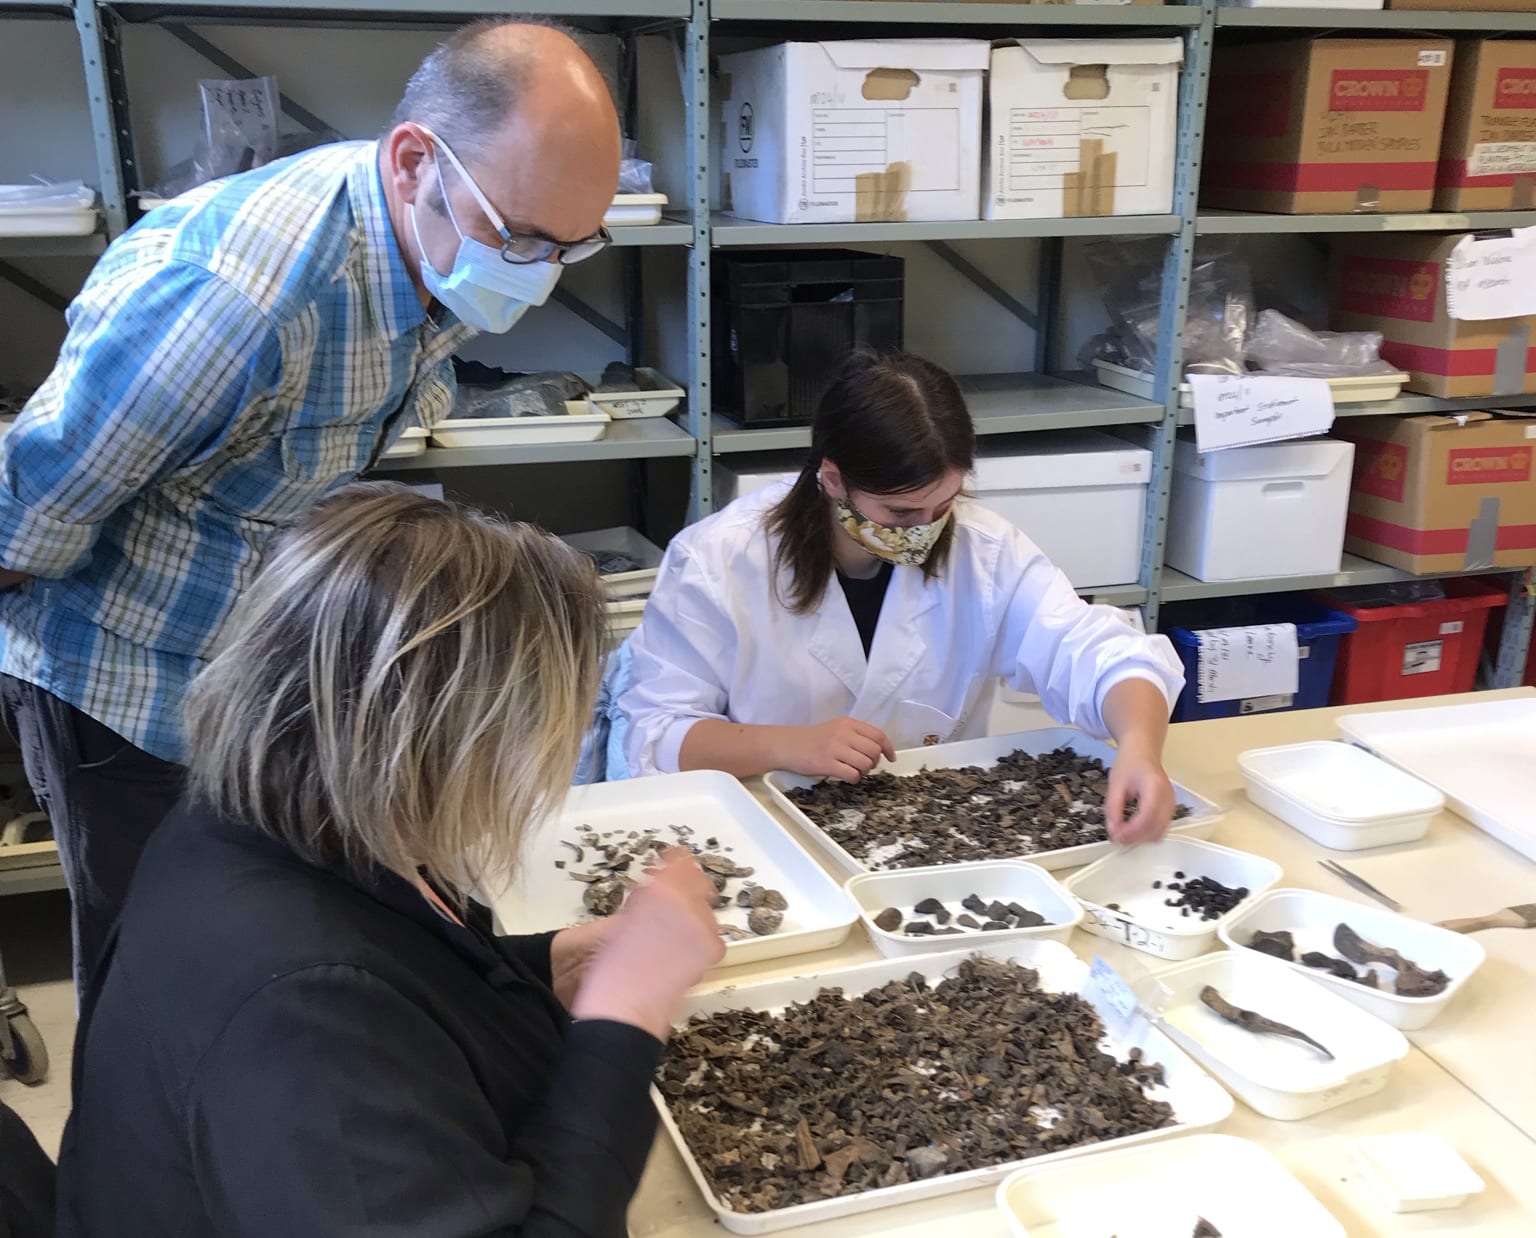 Dr. Gerard O Regan looks on as Tania Maguigan sorts through a tray of material, with the help of Marie Dunn from the University of Otago.